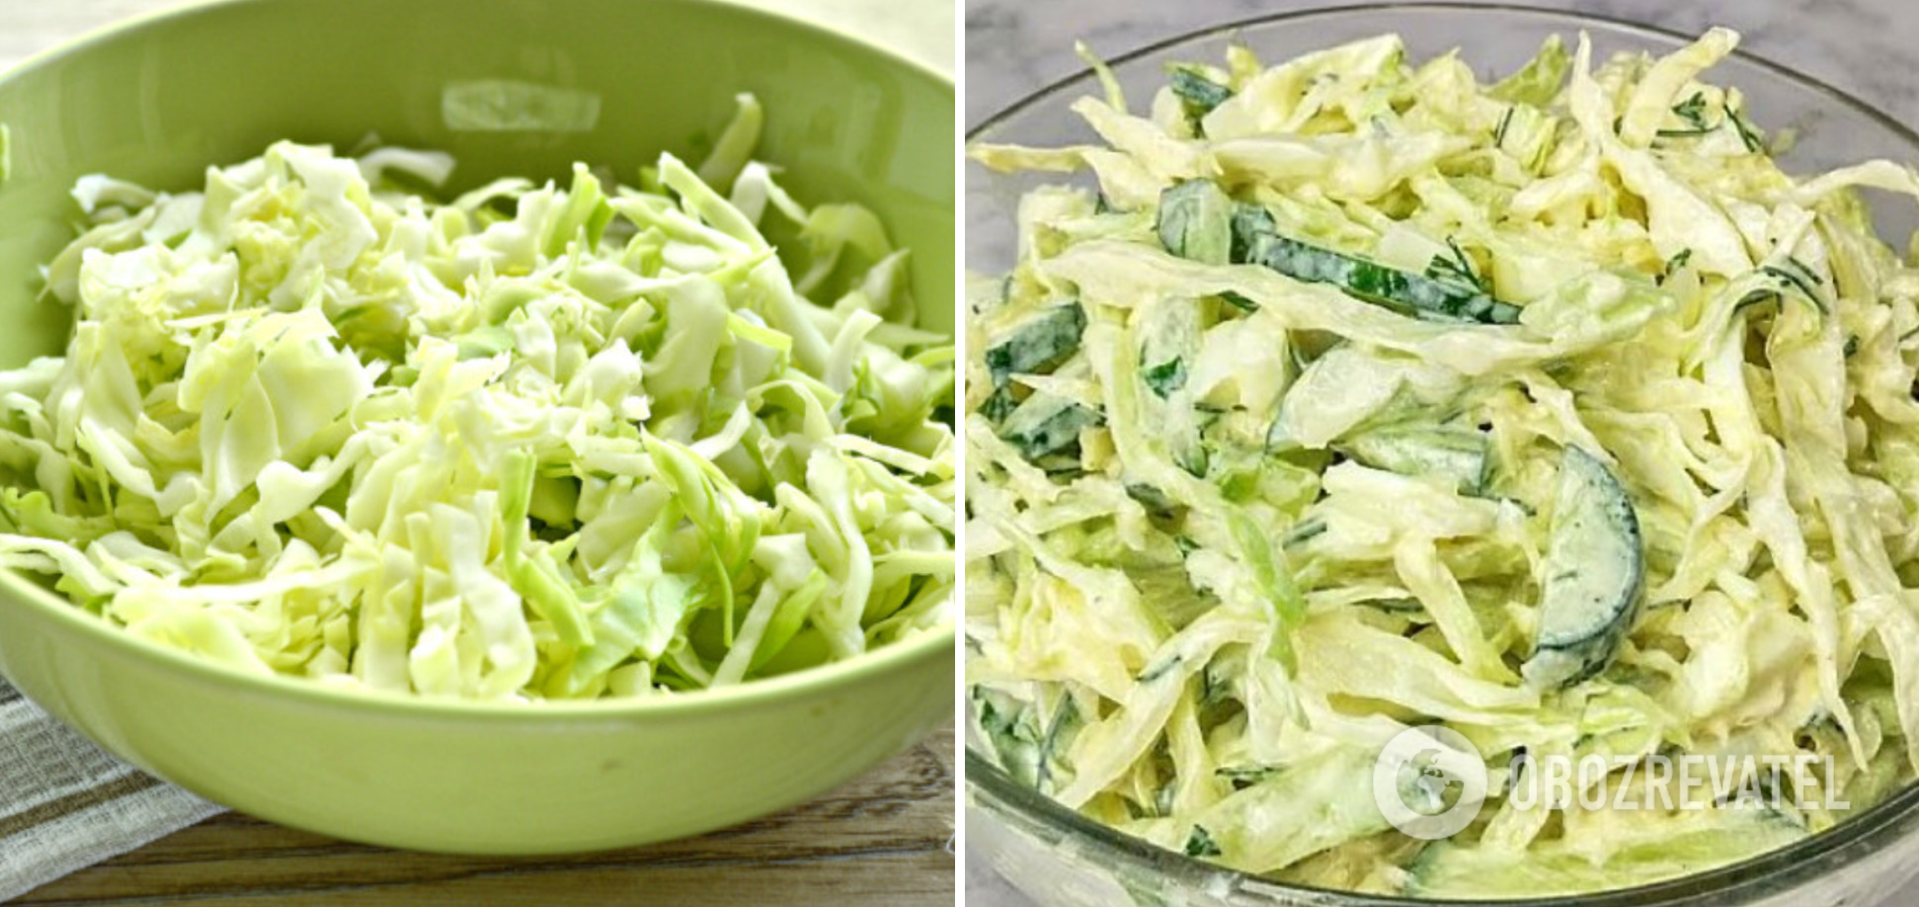 Cabbage, cucumber and egg salad